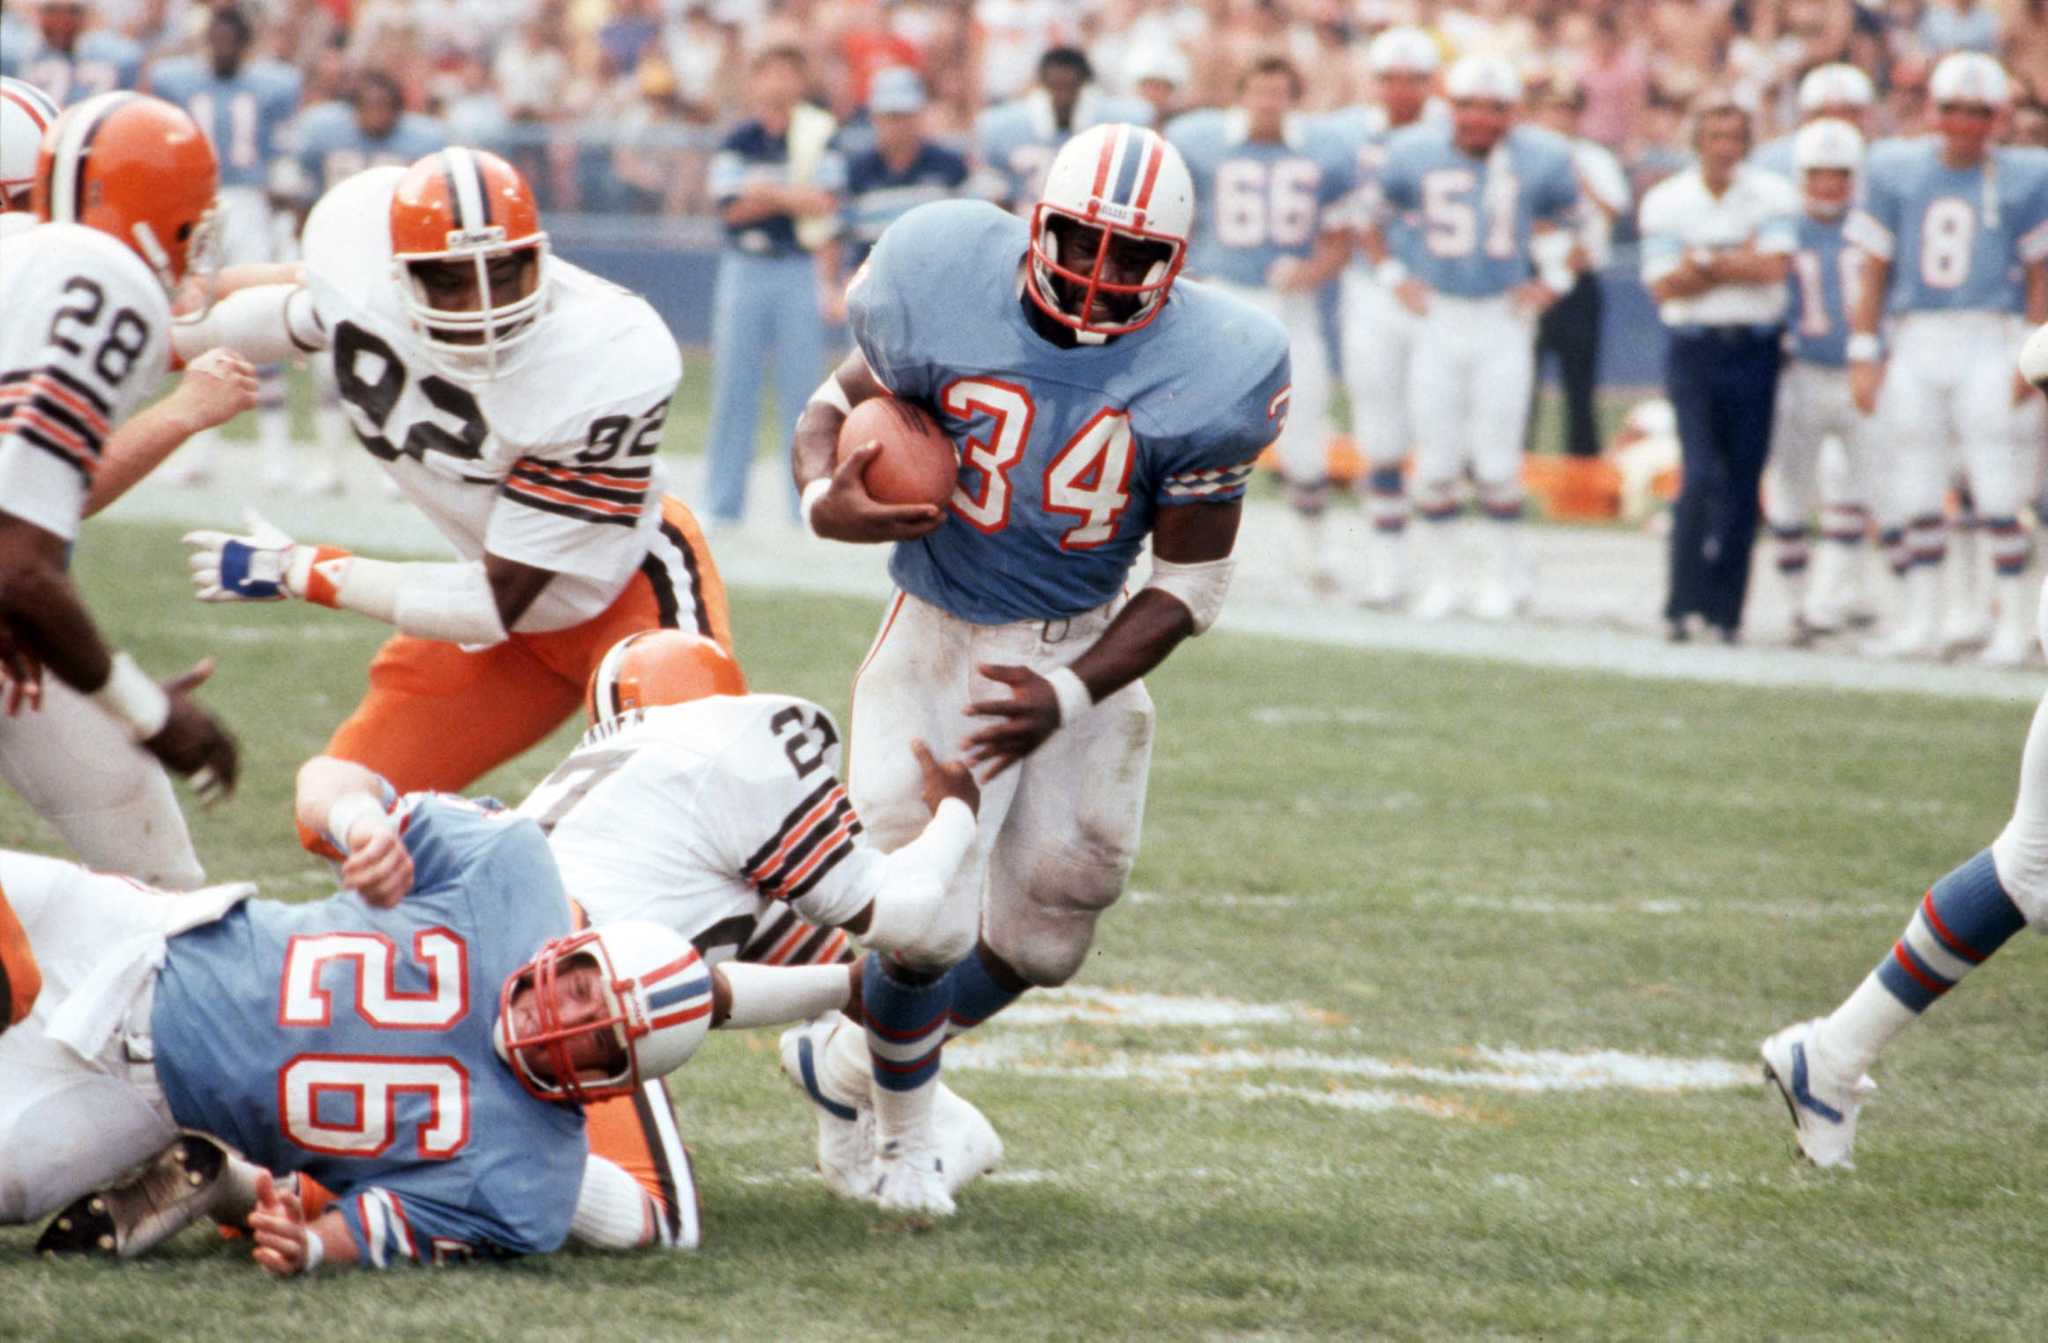 40 years ago the Houston Oilers drafted Earl Campbell and changed